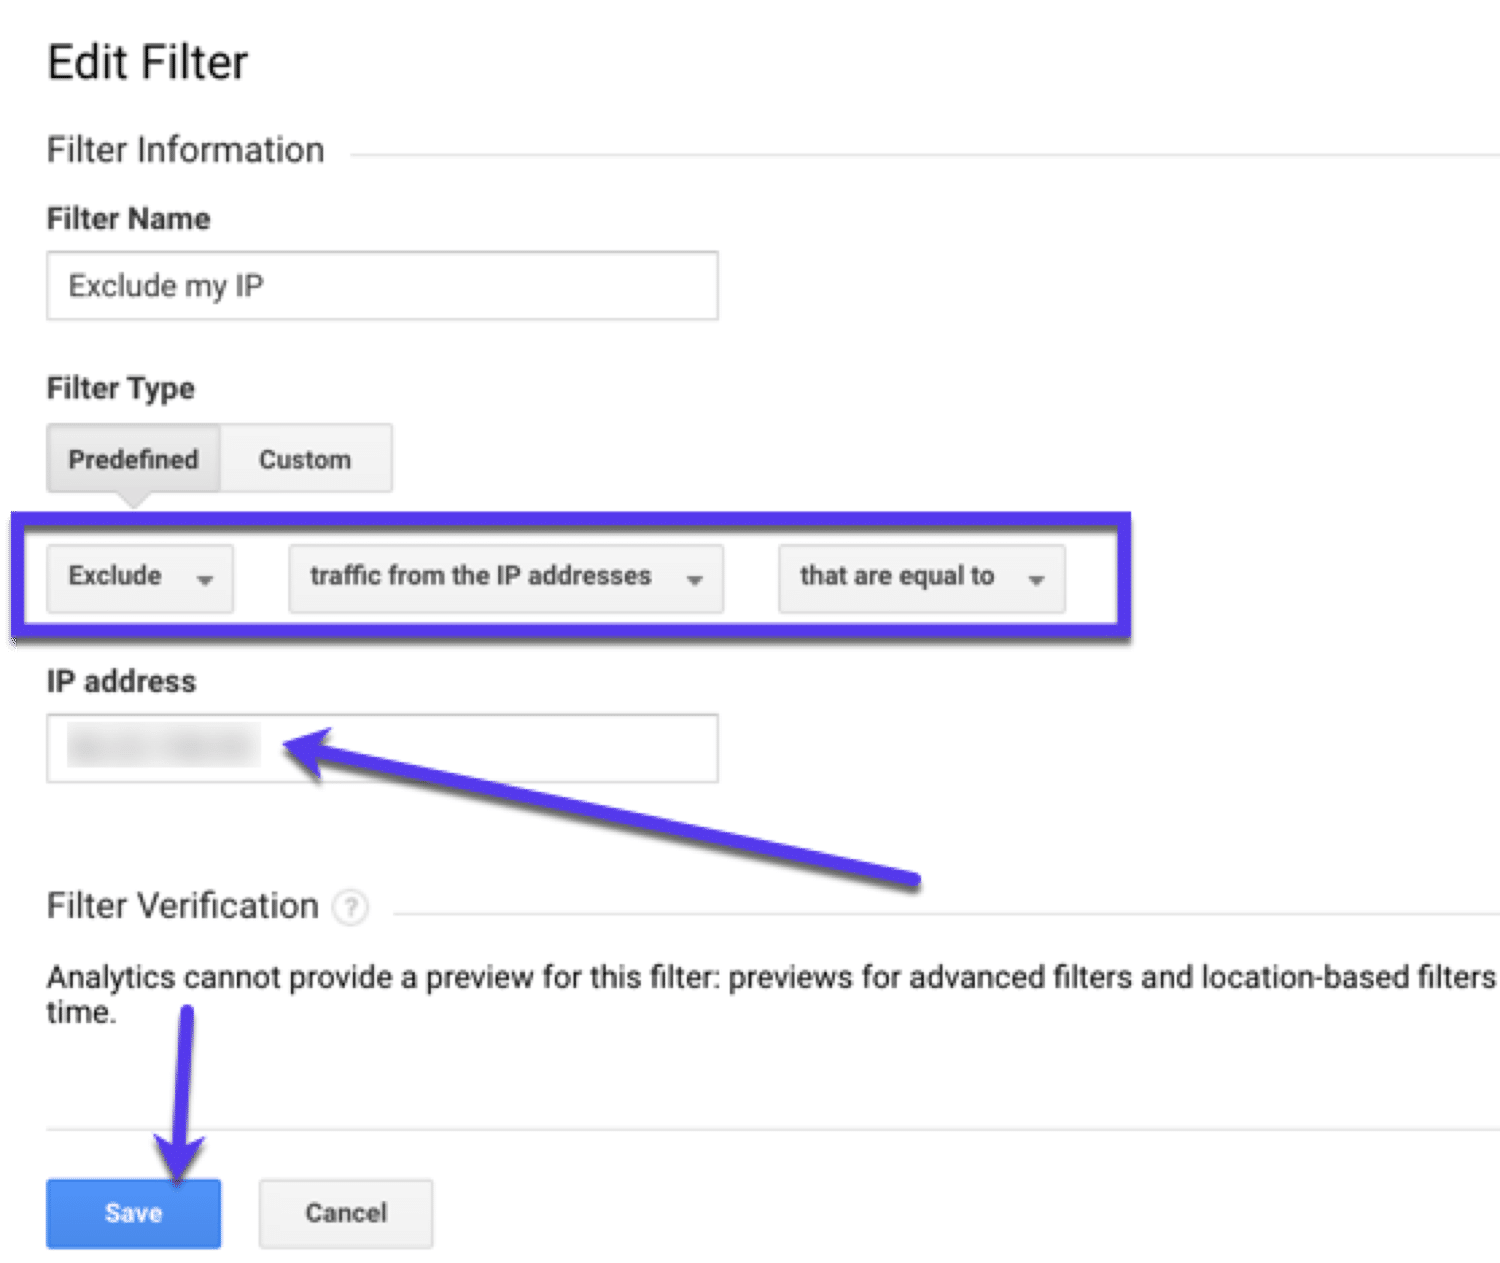 Editing filters in Google Analytics